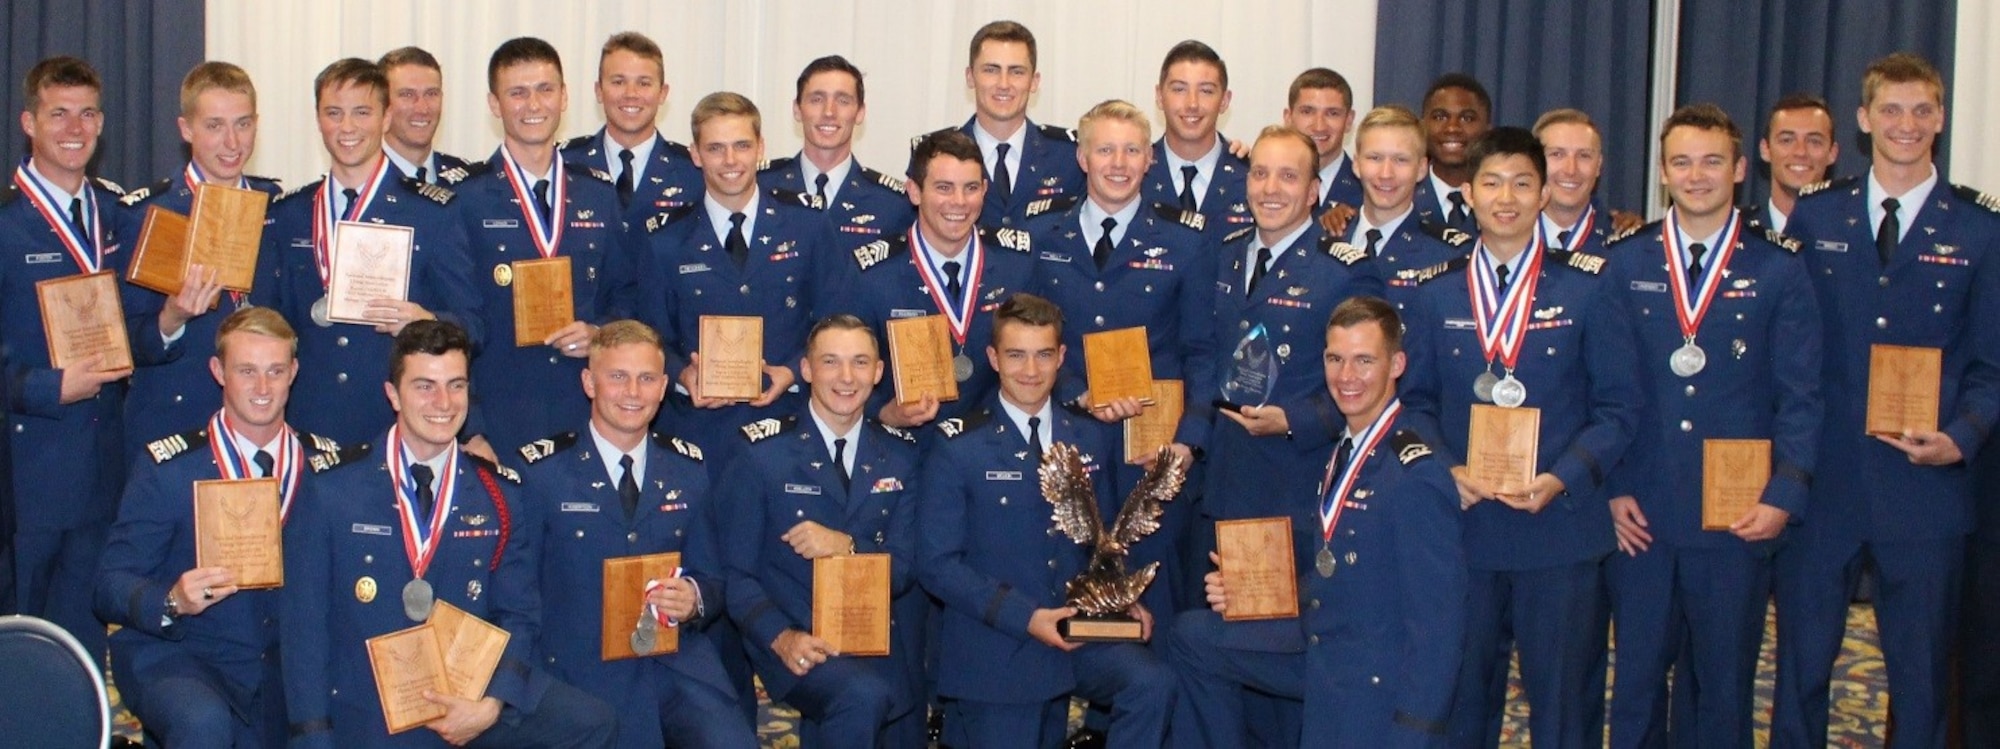 USAFA Flying Team National Intercollegiate Flying Association competition champions pose with their awards during the award ceremony. (U.S. Air Force photo by Tsali Bentley)